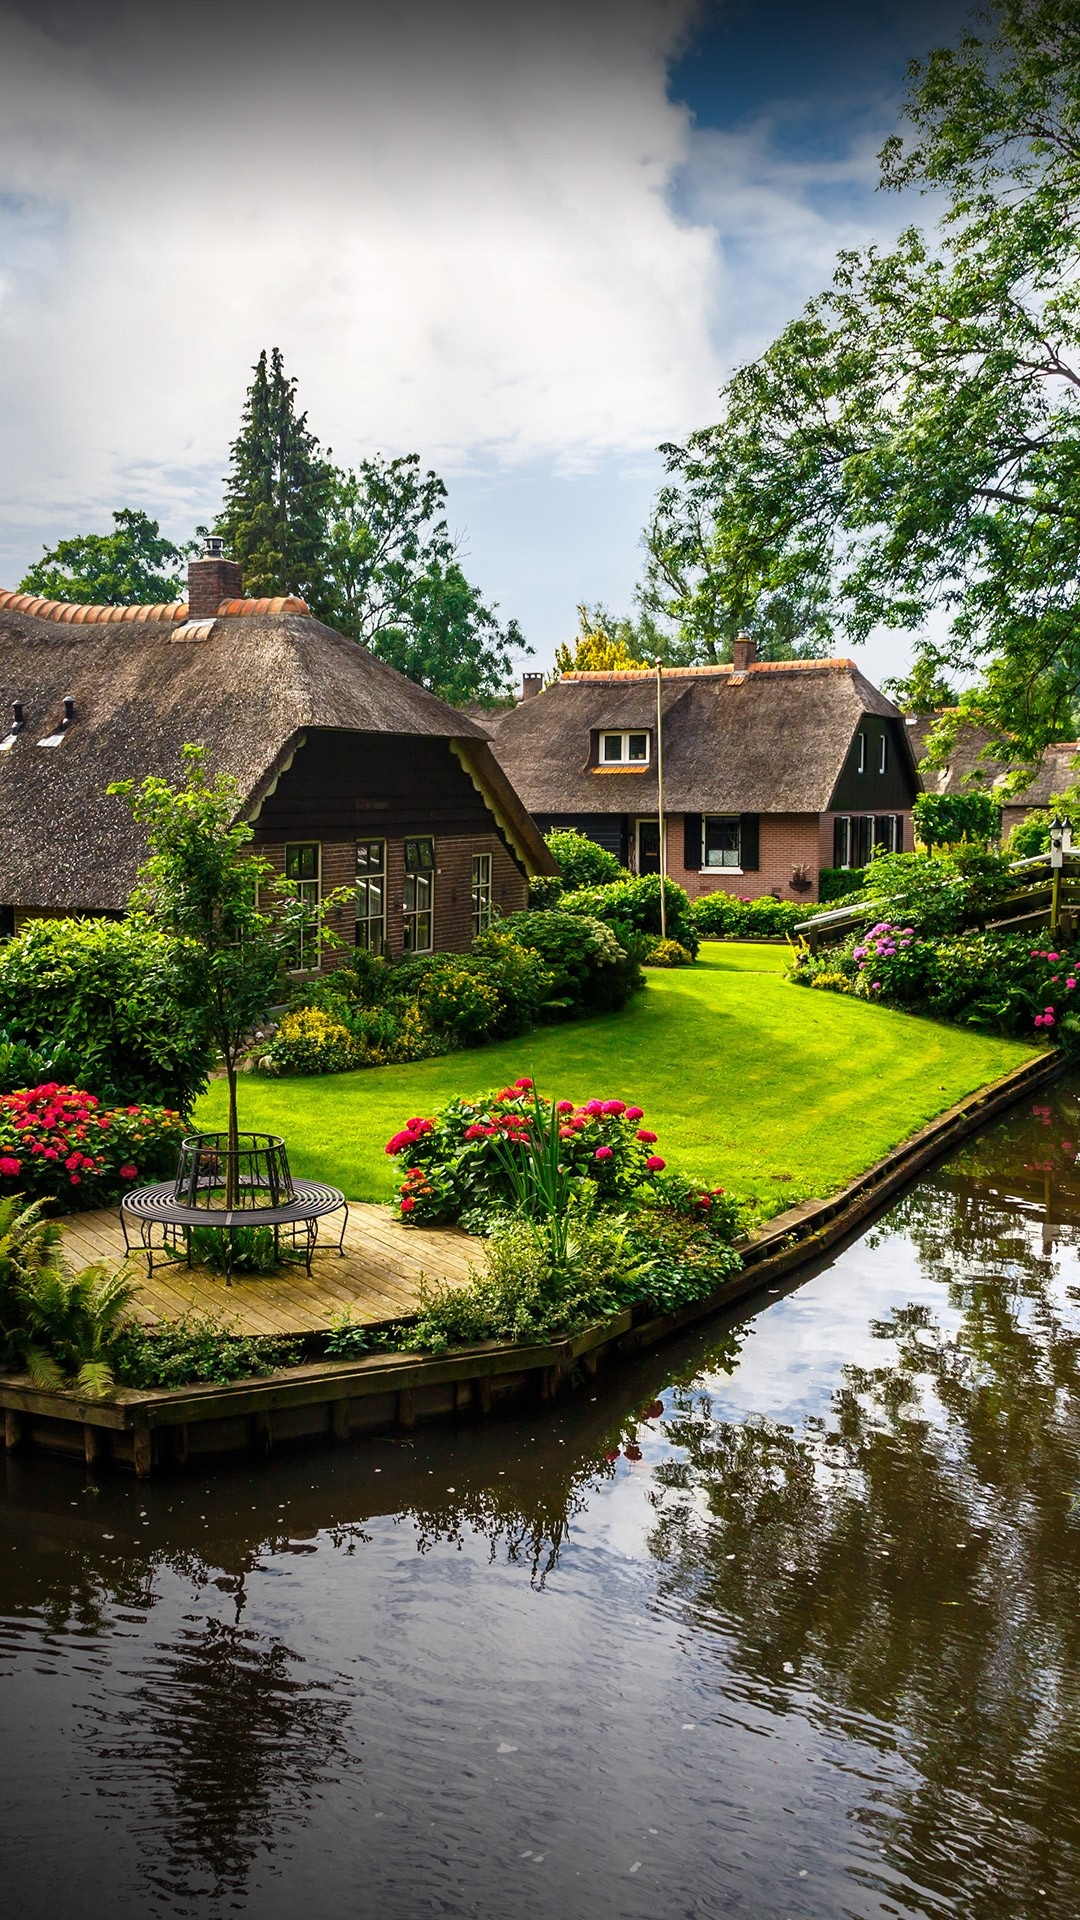 Picturesque village, Thatched roof houses, Charming canals, Overijssel region, 1080x1920 Full HD Handy